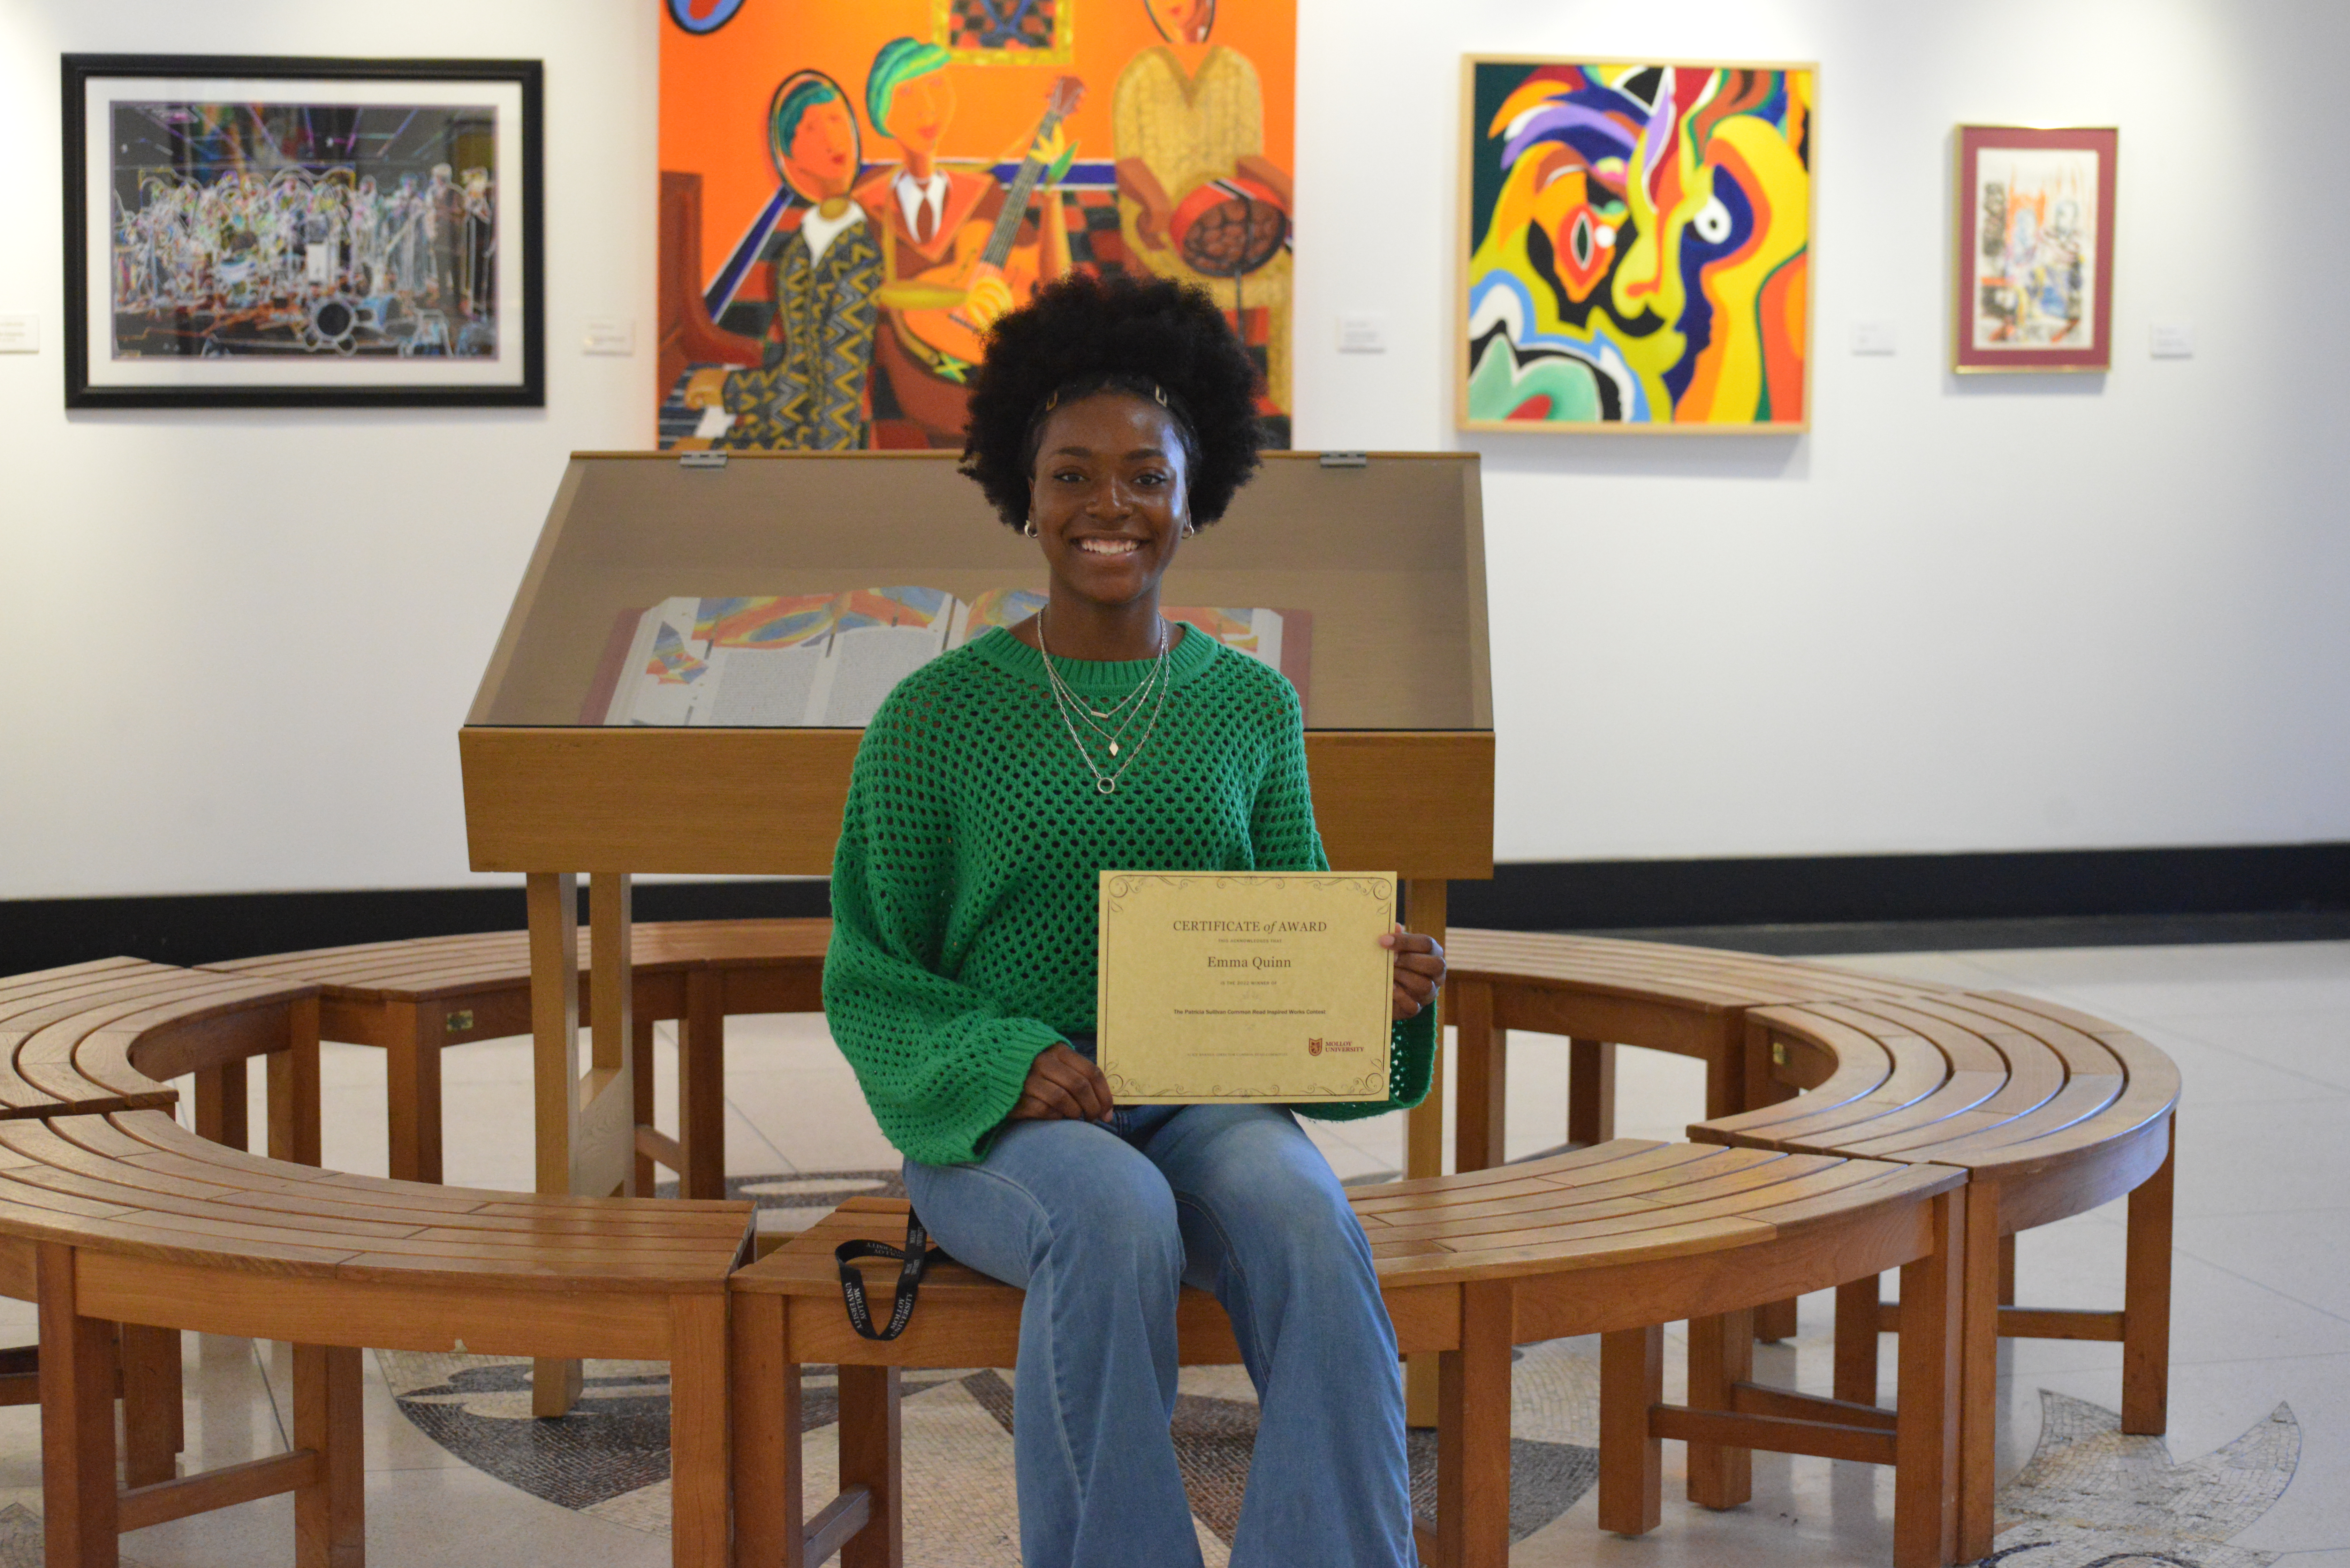 Emma Quinn, winner of "Inspired Works" sits down at Molloy University campus holding award